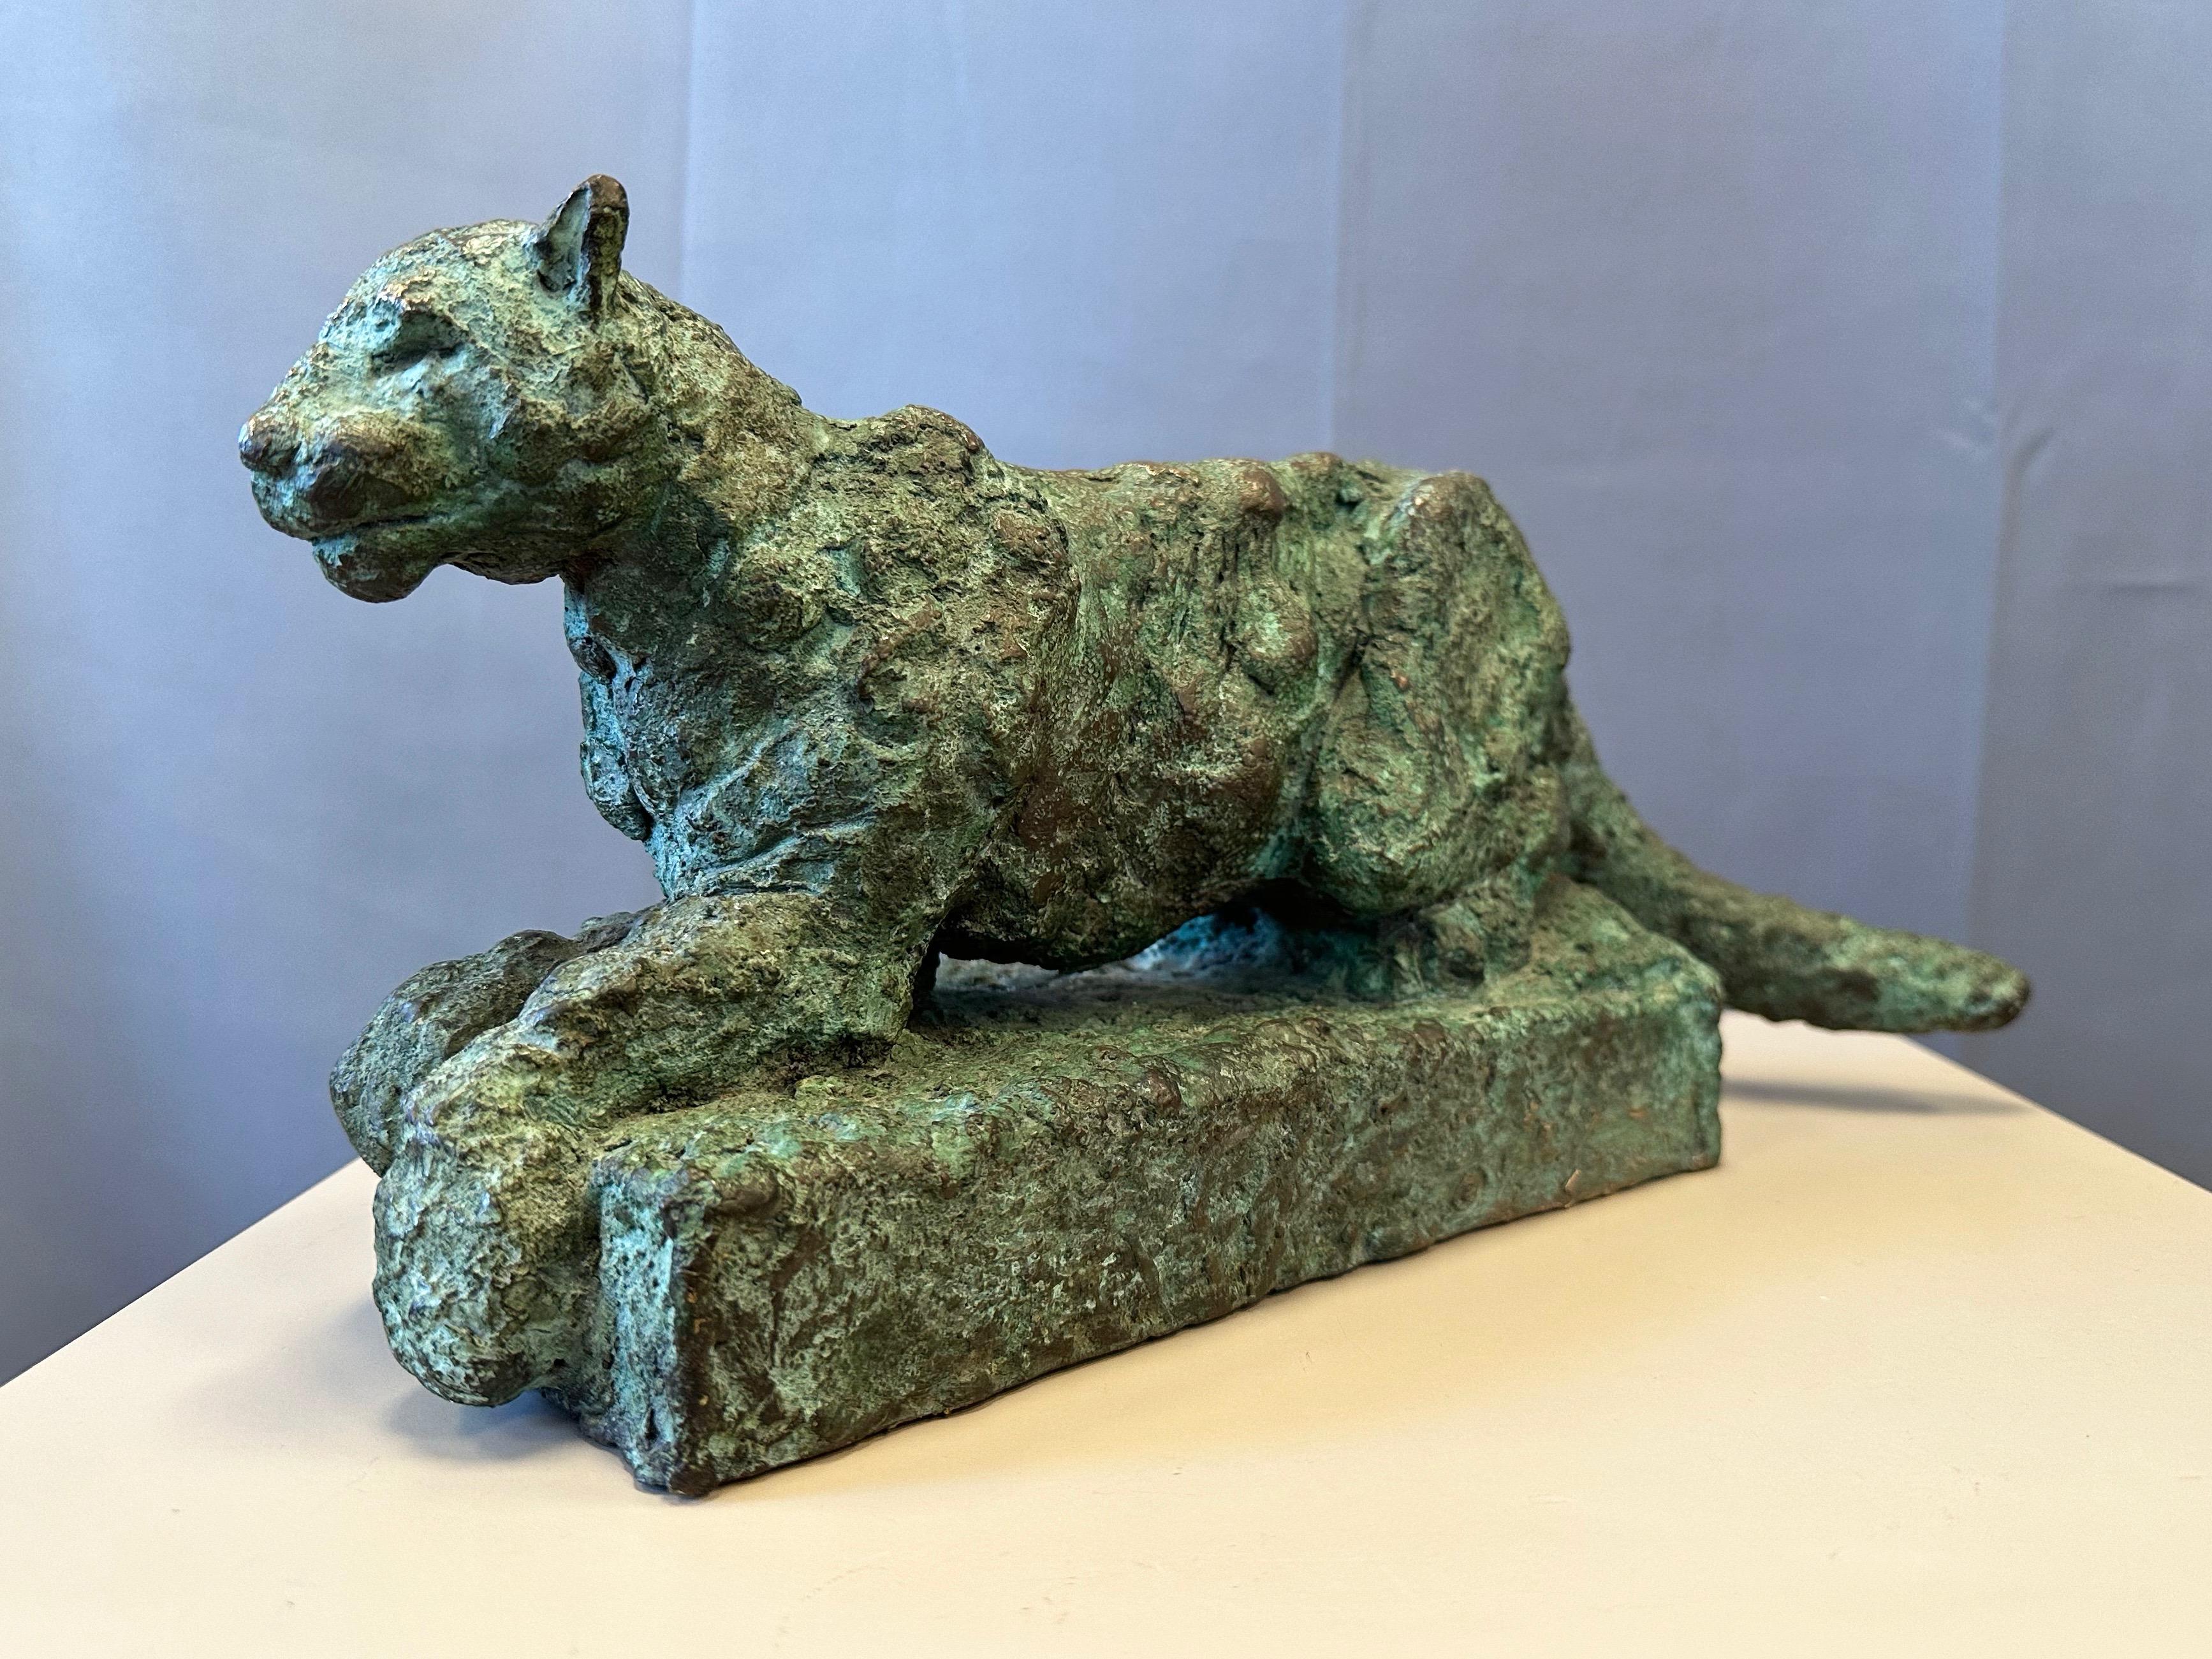 A very handsome and engaging circa early 2000s signed and numbered Brutalist cast bronze sculpture of a puma by world renowned San Francisco Bay Area sculptor and painter Bruce Hasson (b. 1954).

The big cat—deemed a puma based on its similarity to